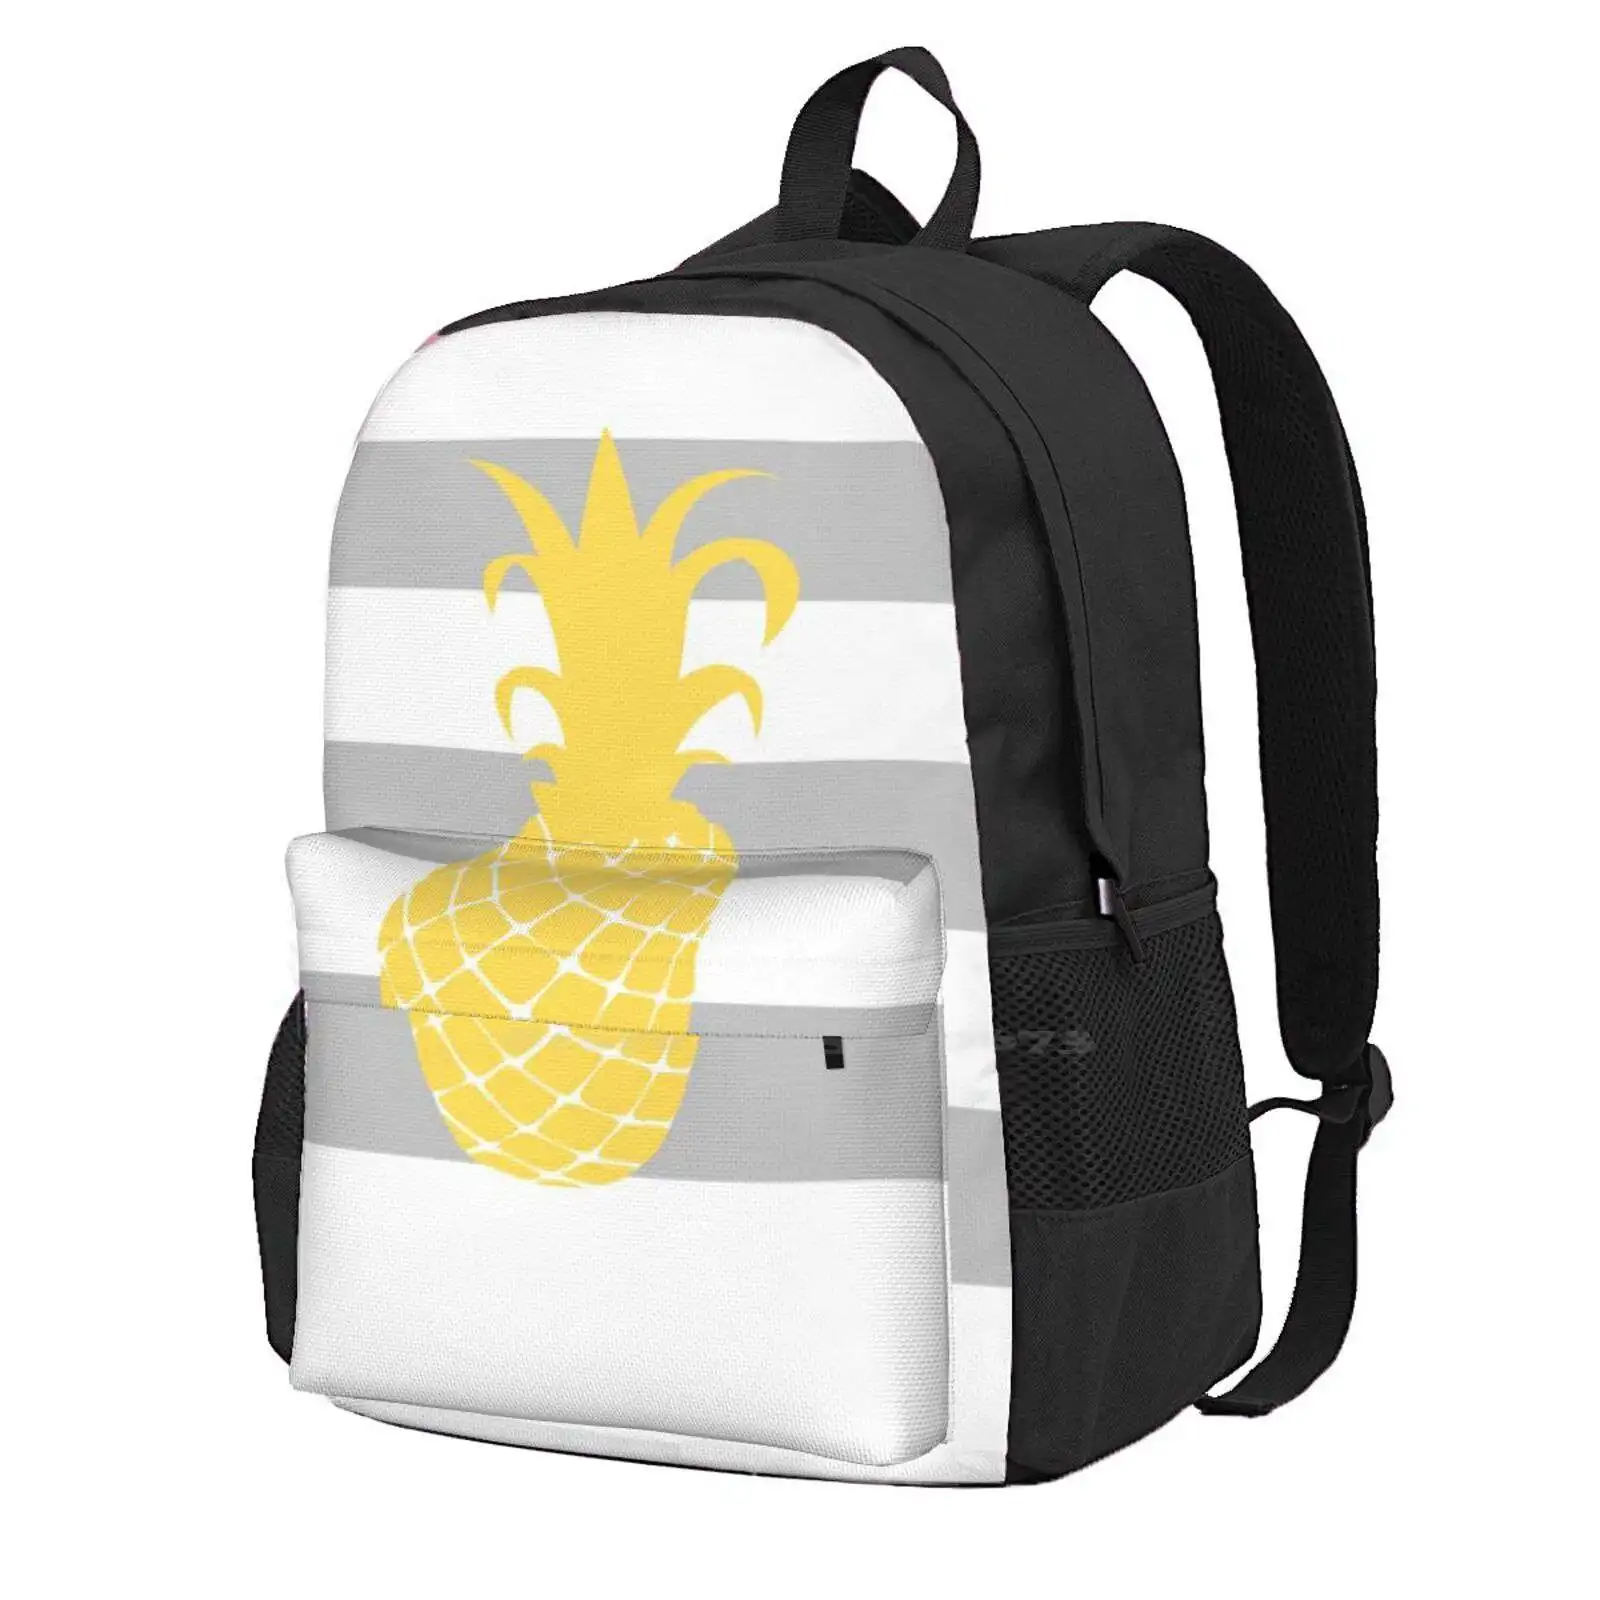 

Mustard Yellow On Silver Gray And White Stripes Travel Laptop Bagpack School Bags Stripes Striped Tropical Islands Hawaii White